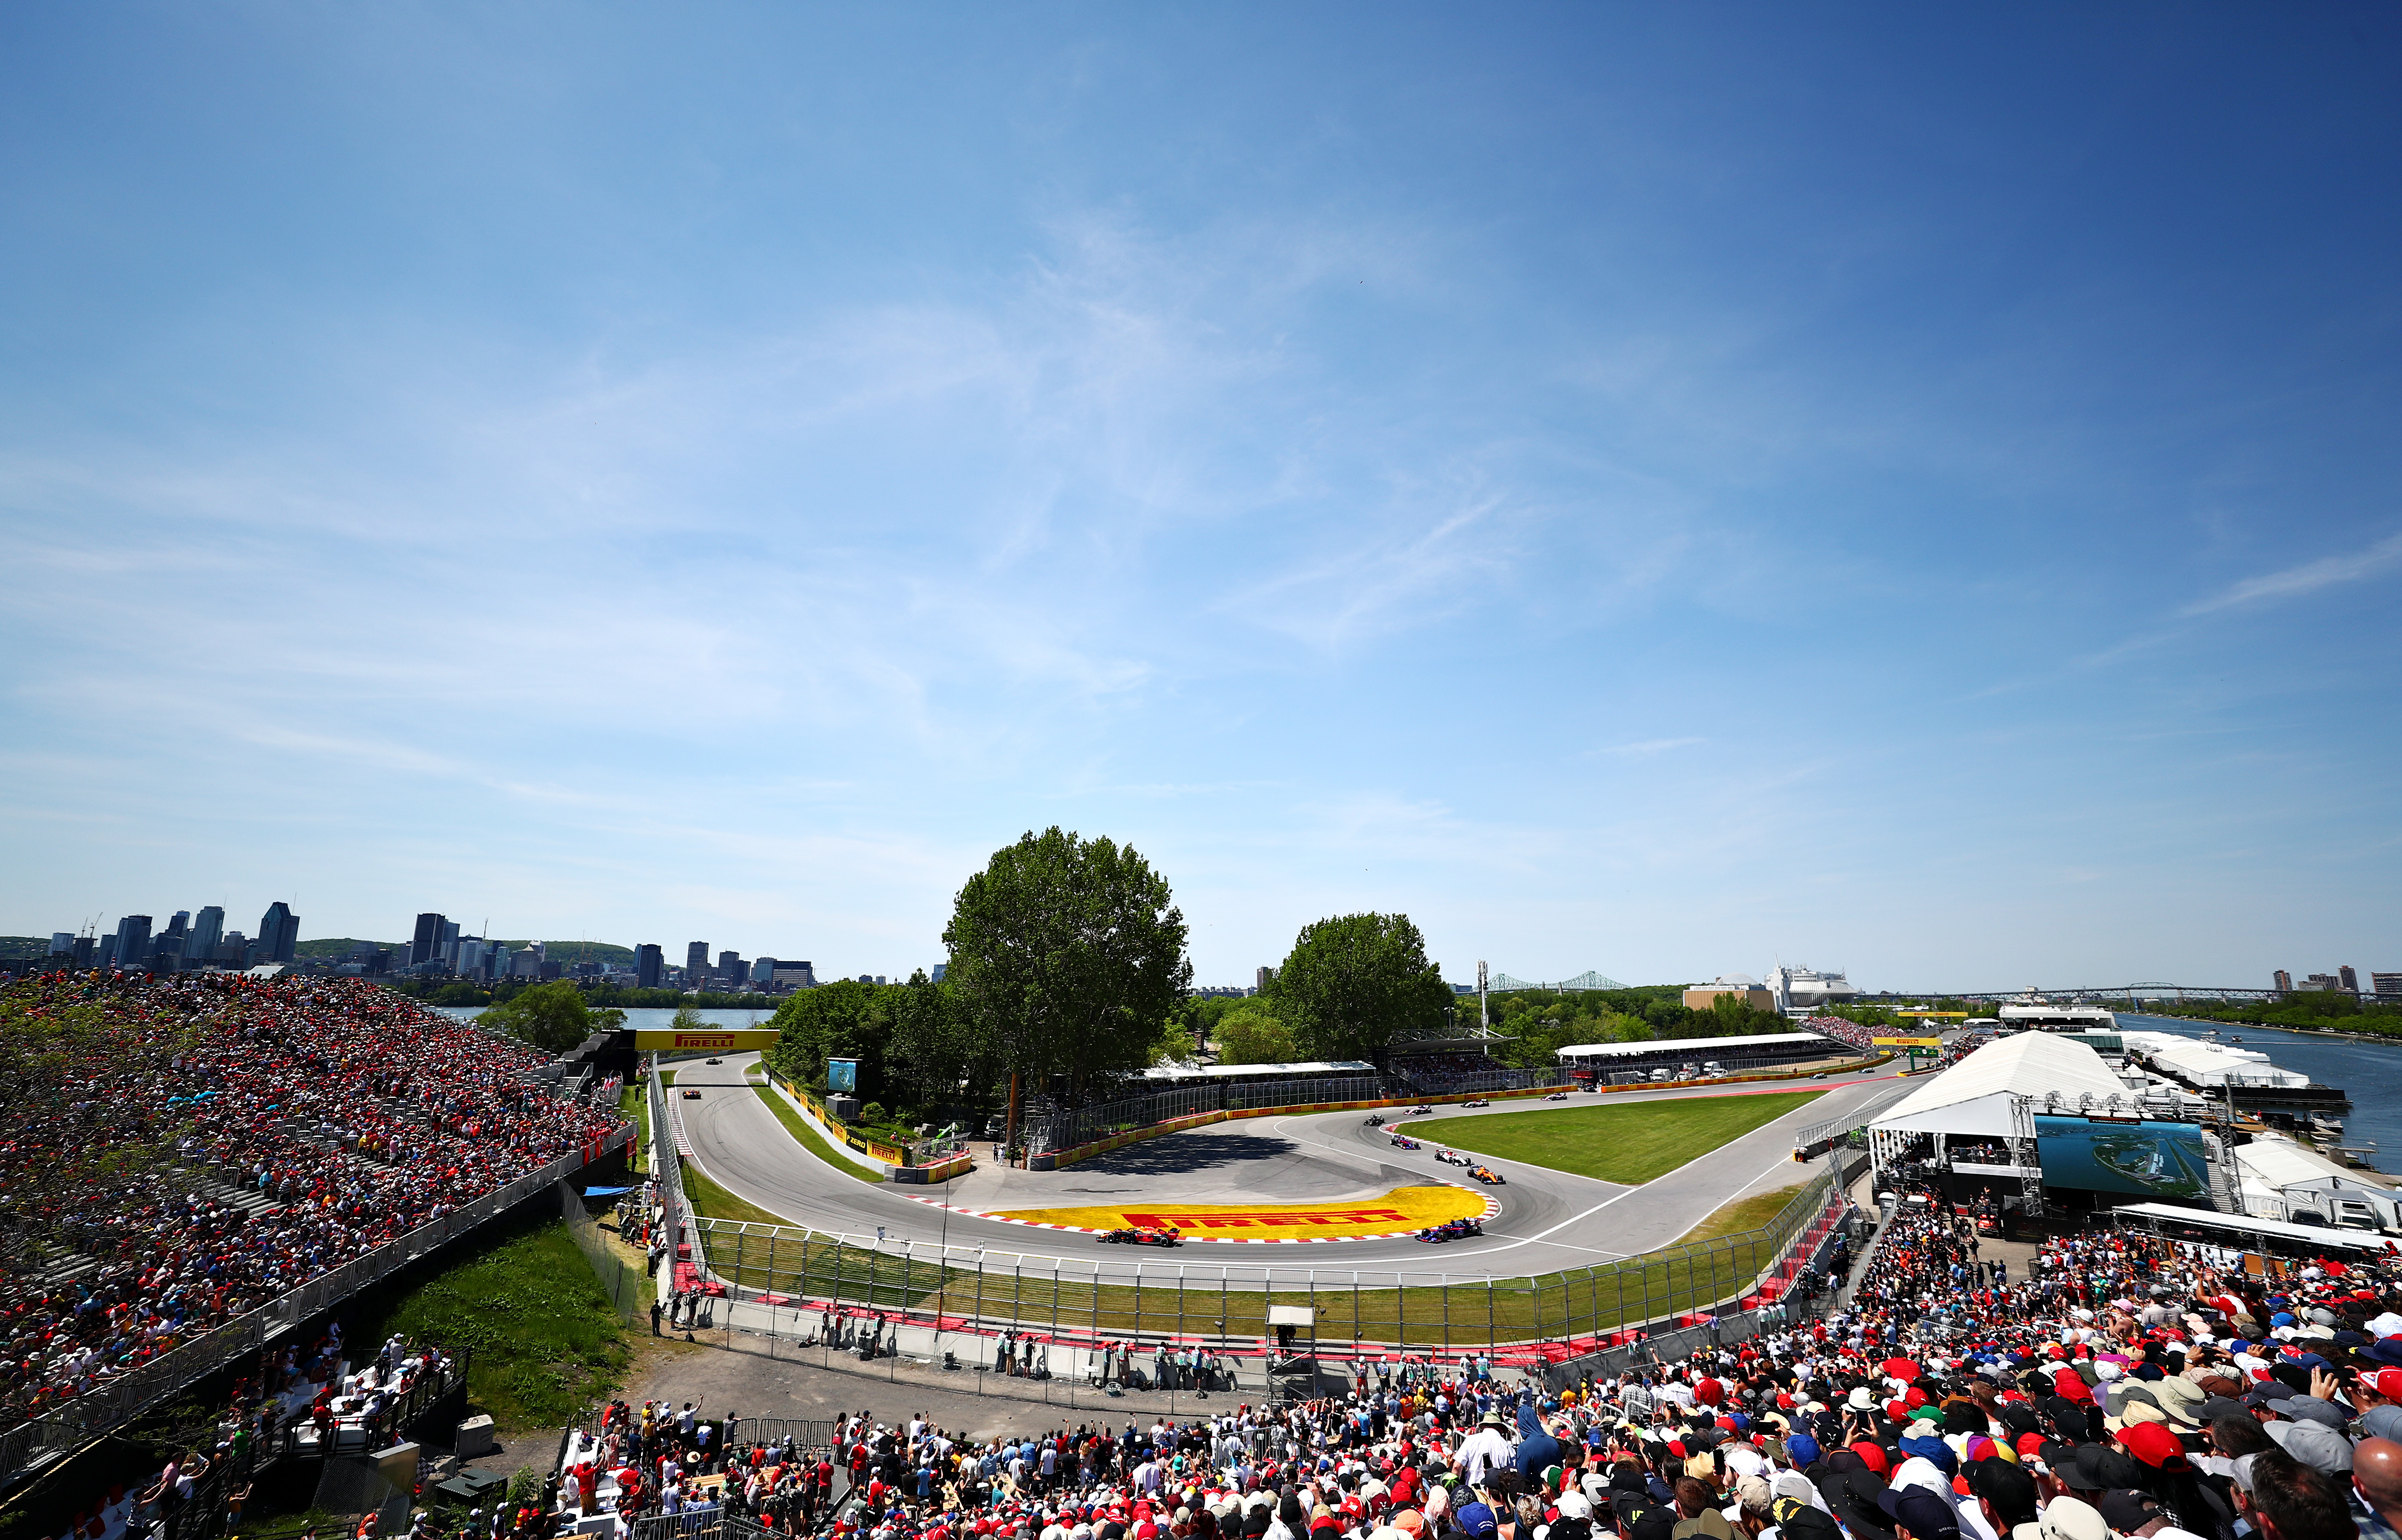 A general view of the formation lap during the F1 Grand Prix of Canada at Circuit Gilles Villeneuve on June 09, 2019 in Montreal, Canada.